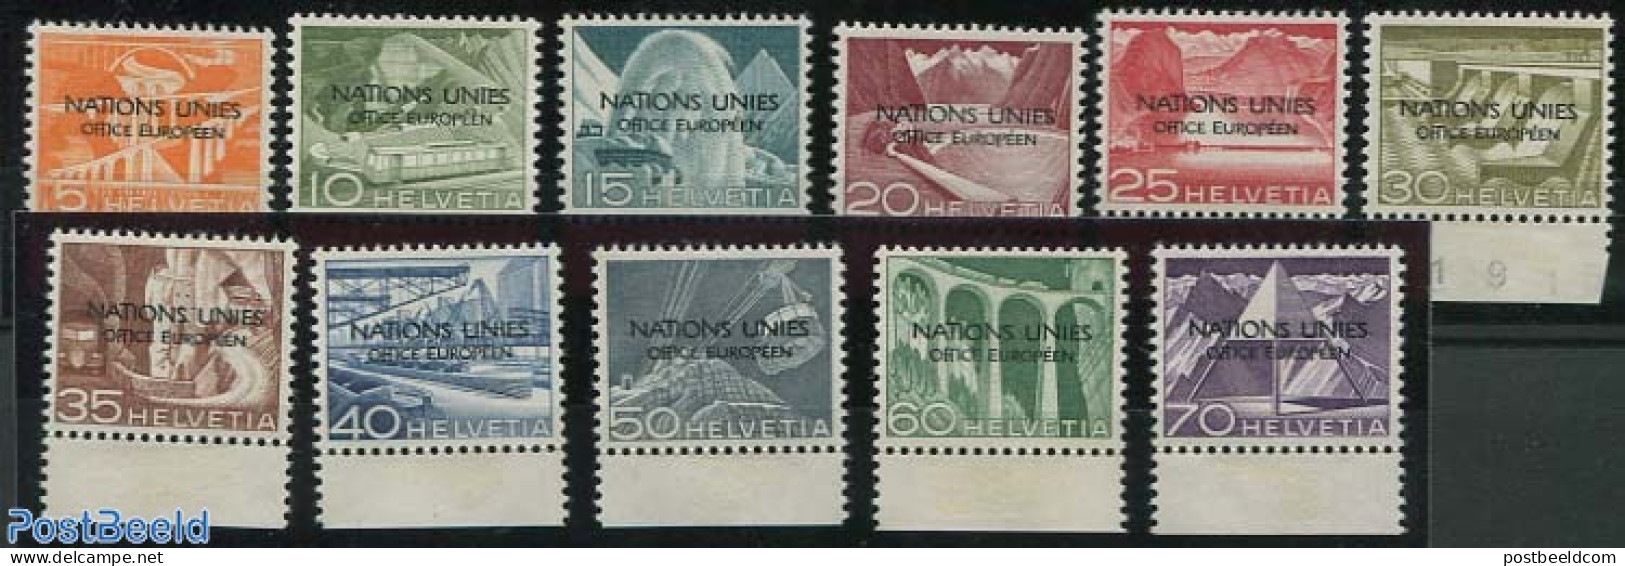 Switzerland 1950 UNO Office 11v, Overprint Variety: OF[ICE, Mint NH, Nature - Transport - Various - Water, Dams & Fall.. - Neufs